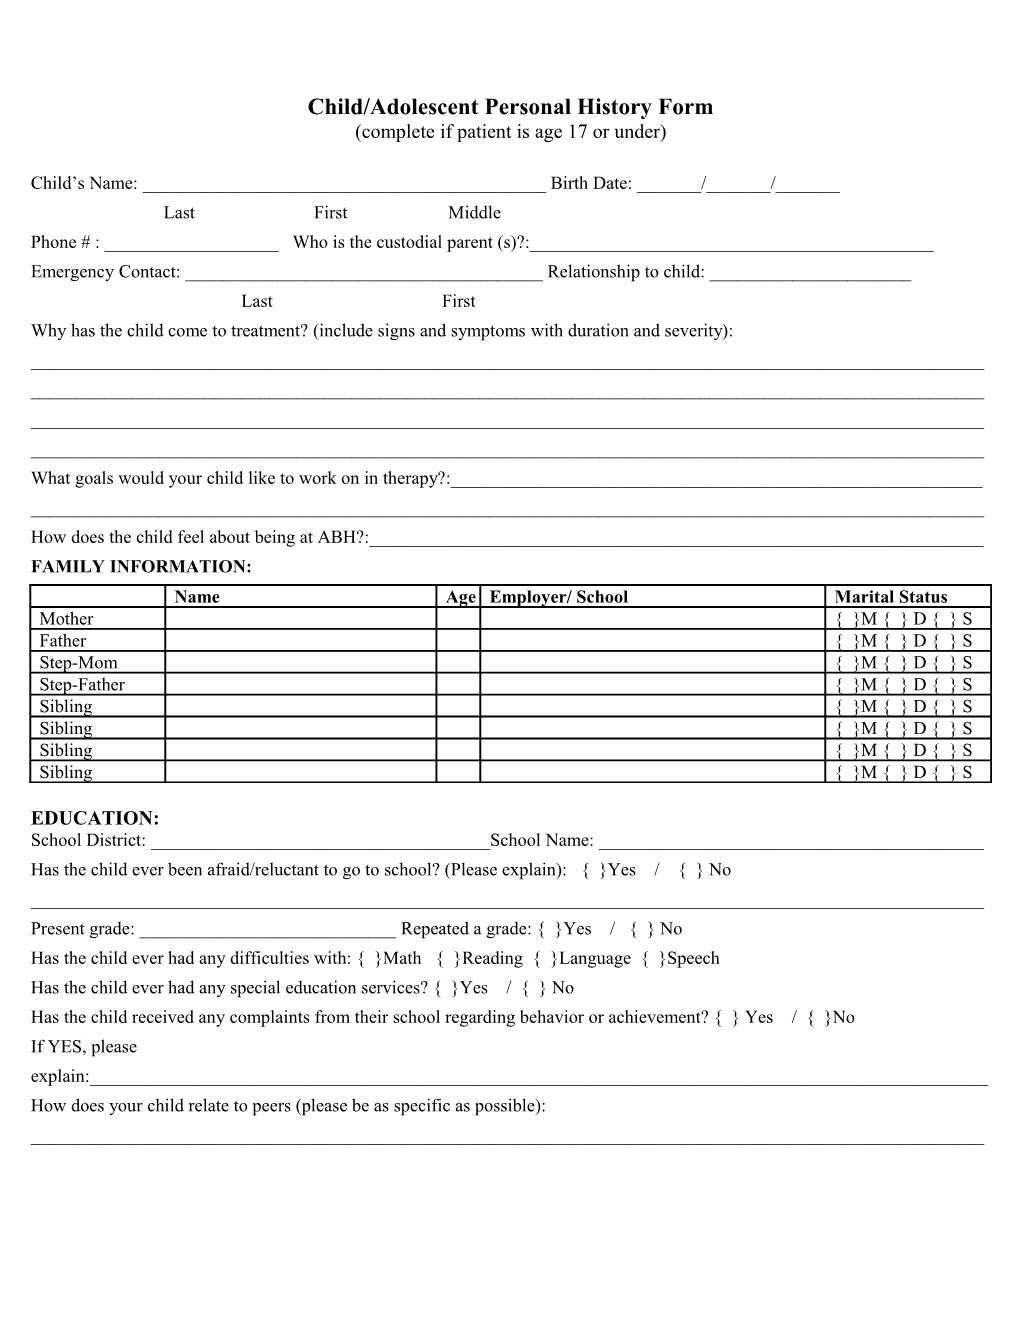 Child/Adolescent Personal History Form